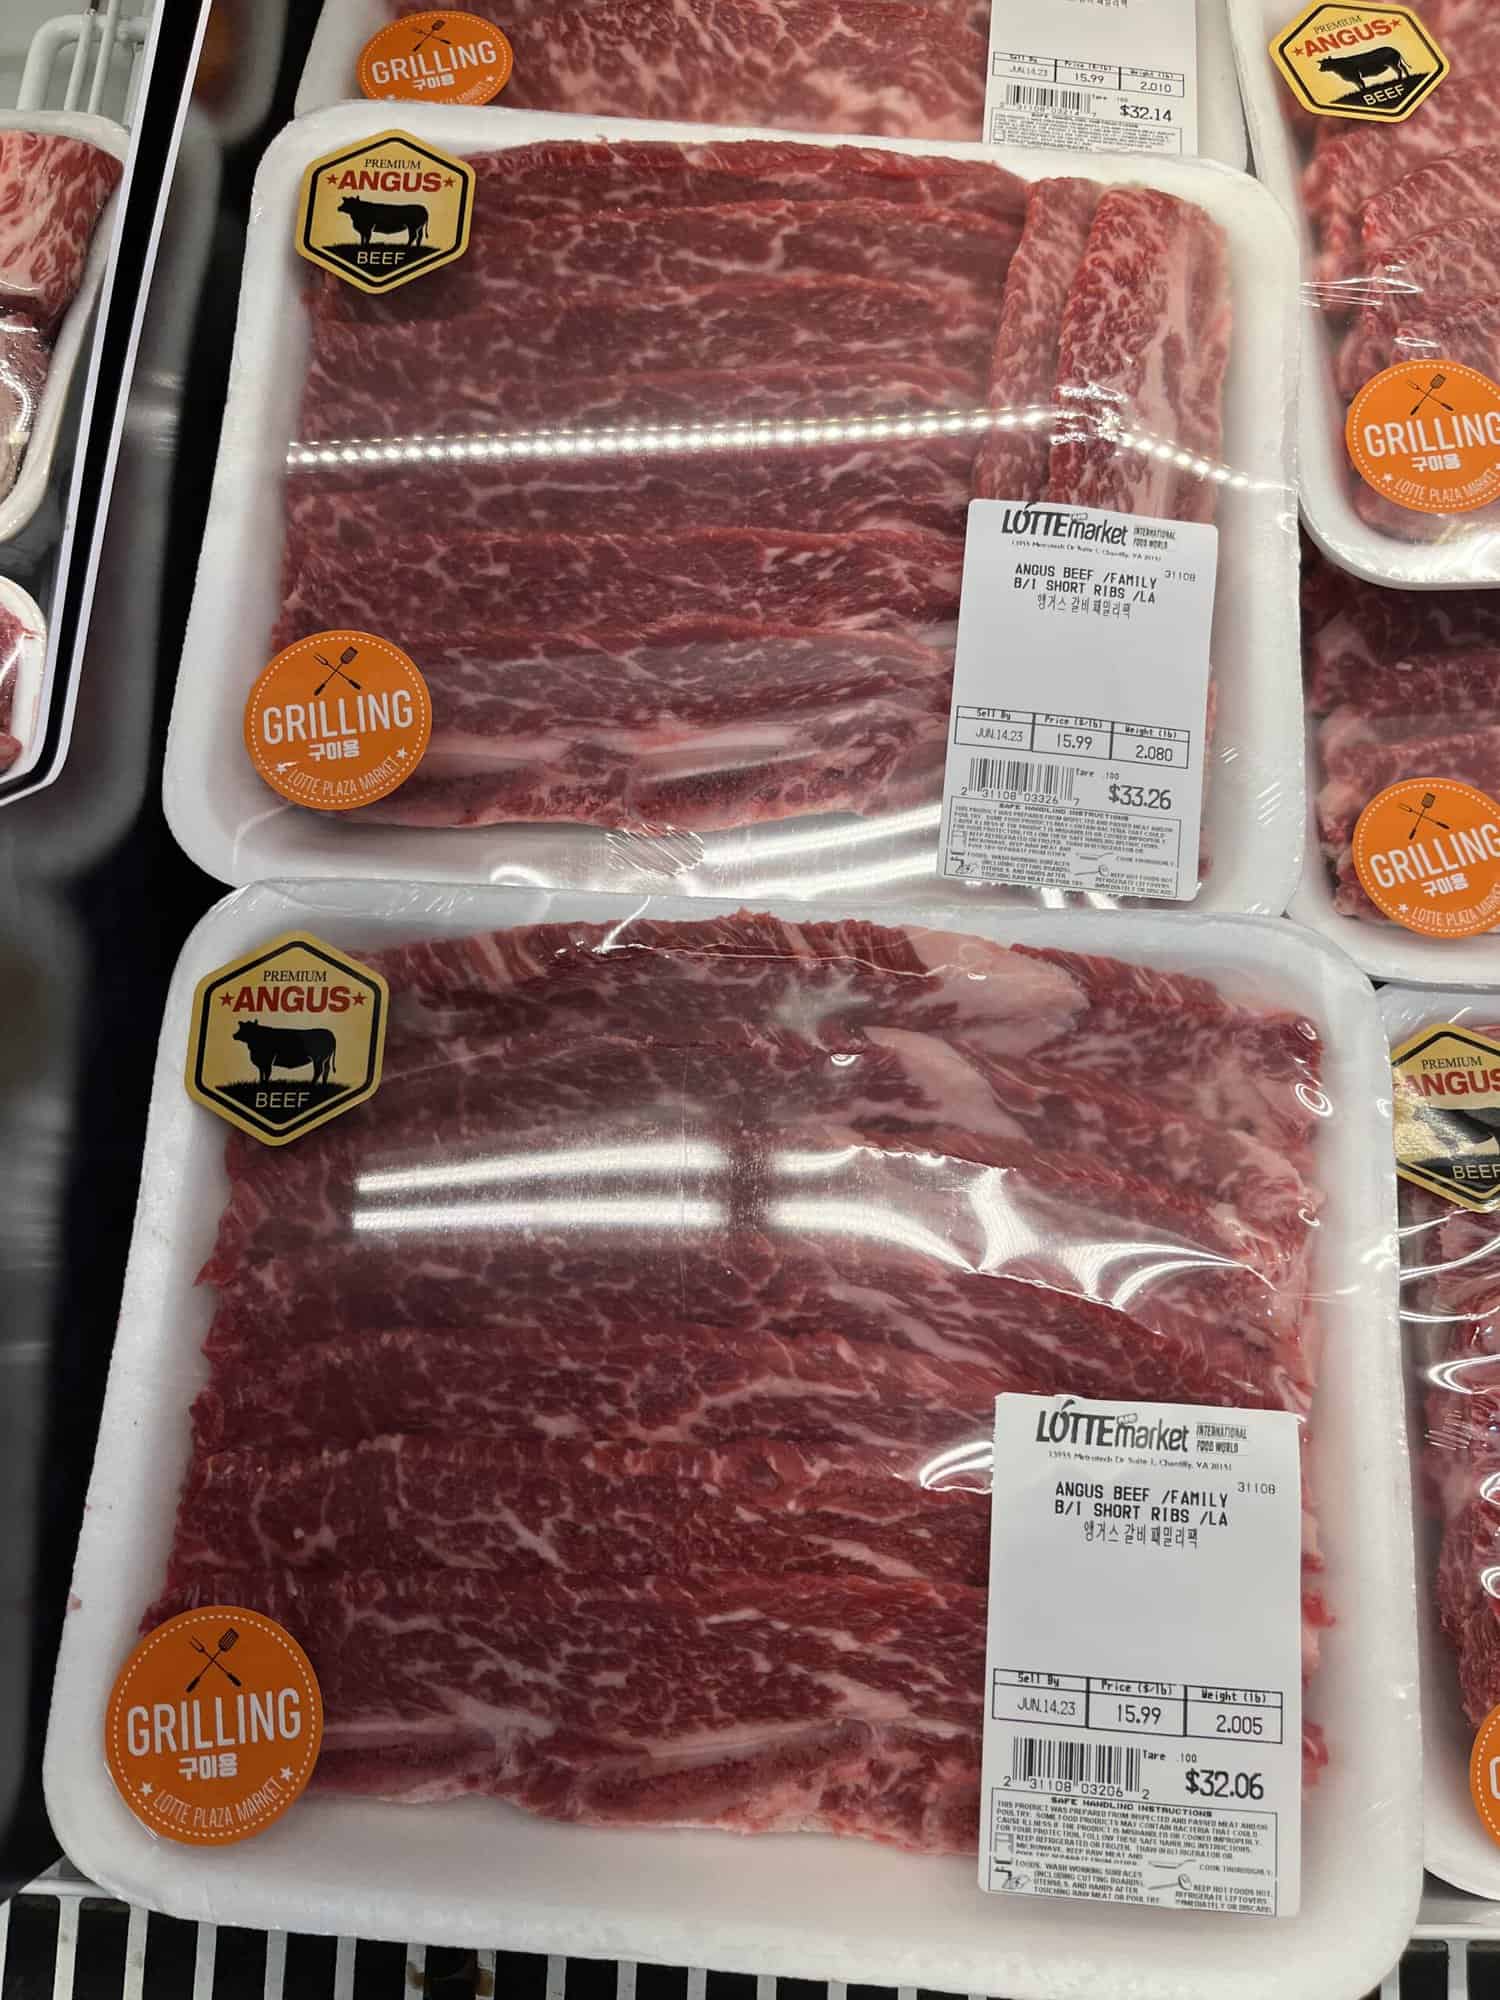 Raw packaged kalbi at Lotte Market